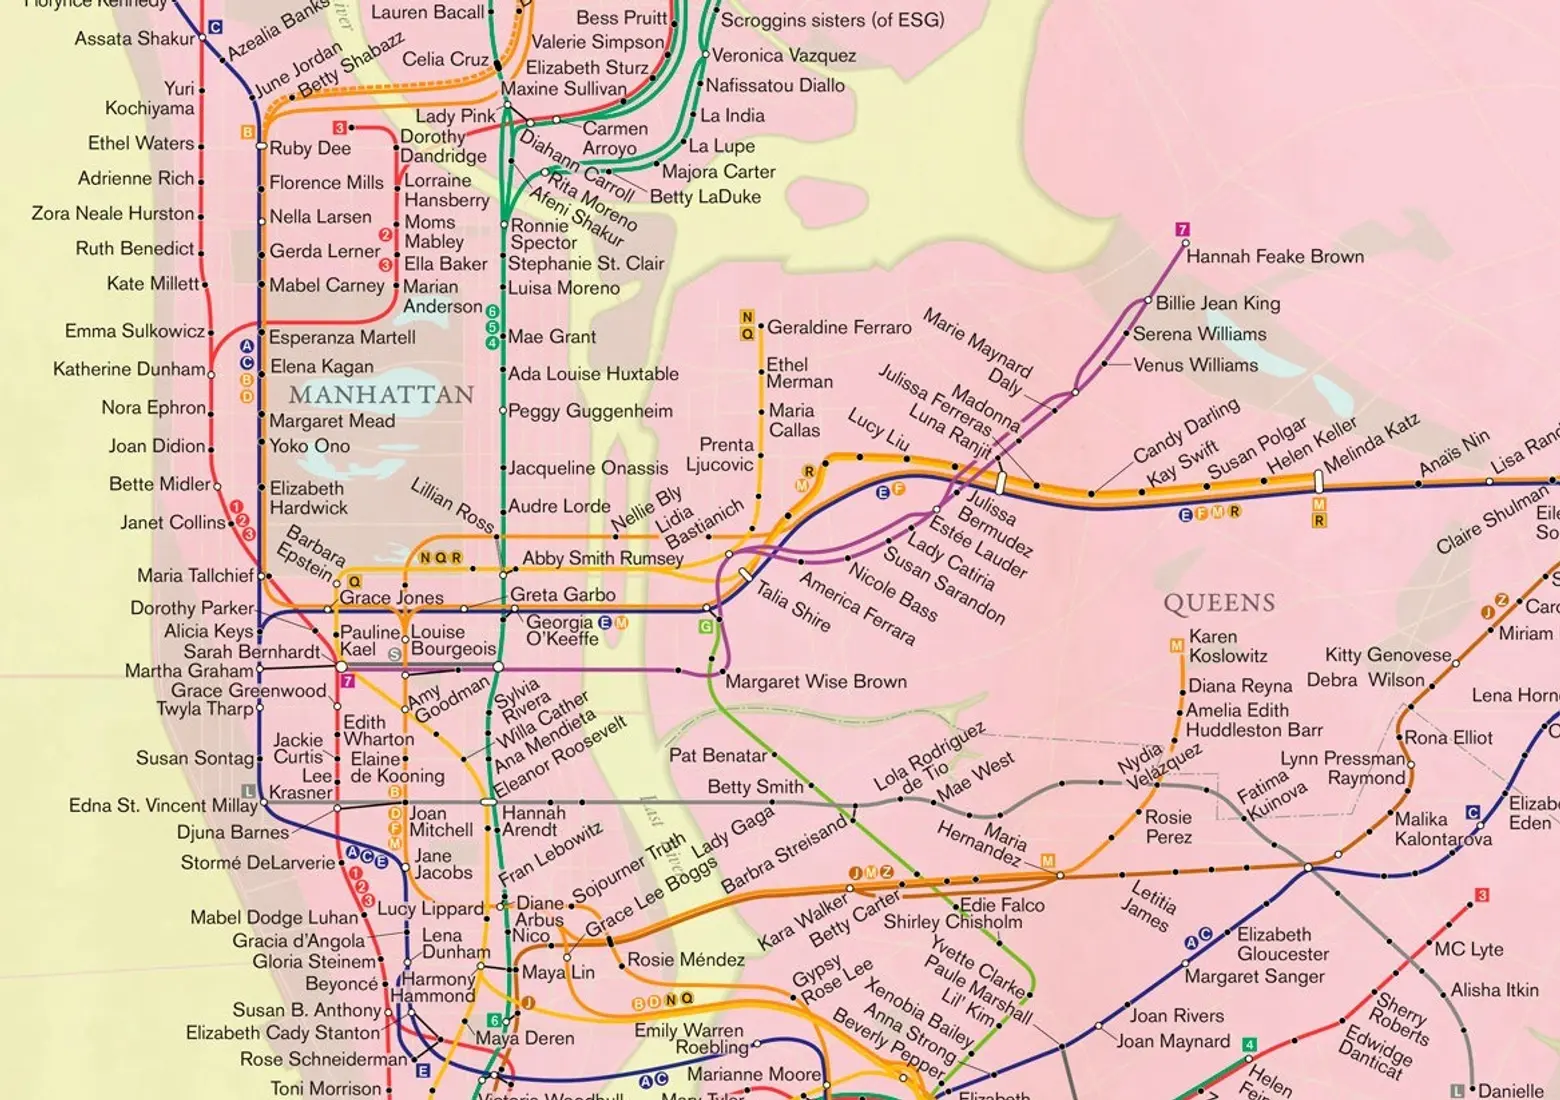 ‘City of Women’ turns the subway map into an homage to the city’s greatest females